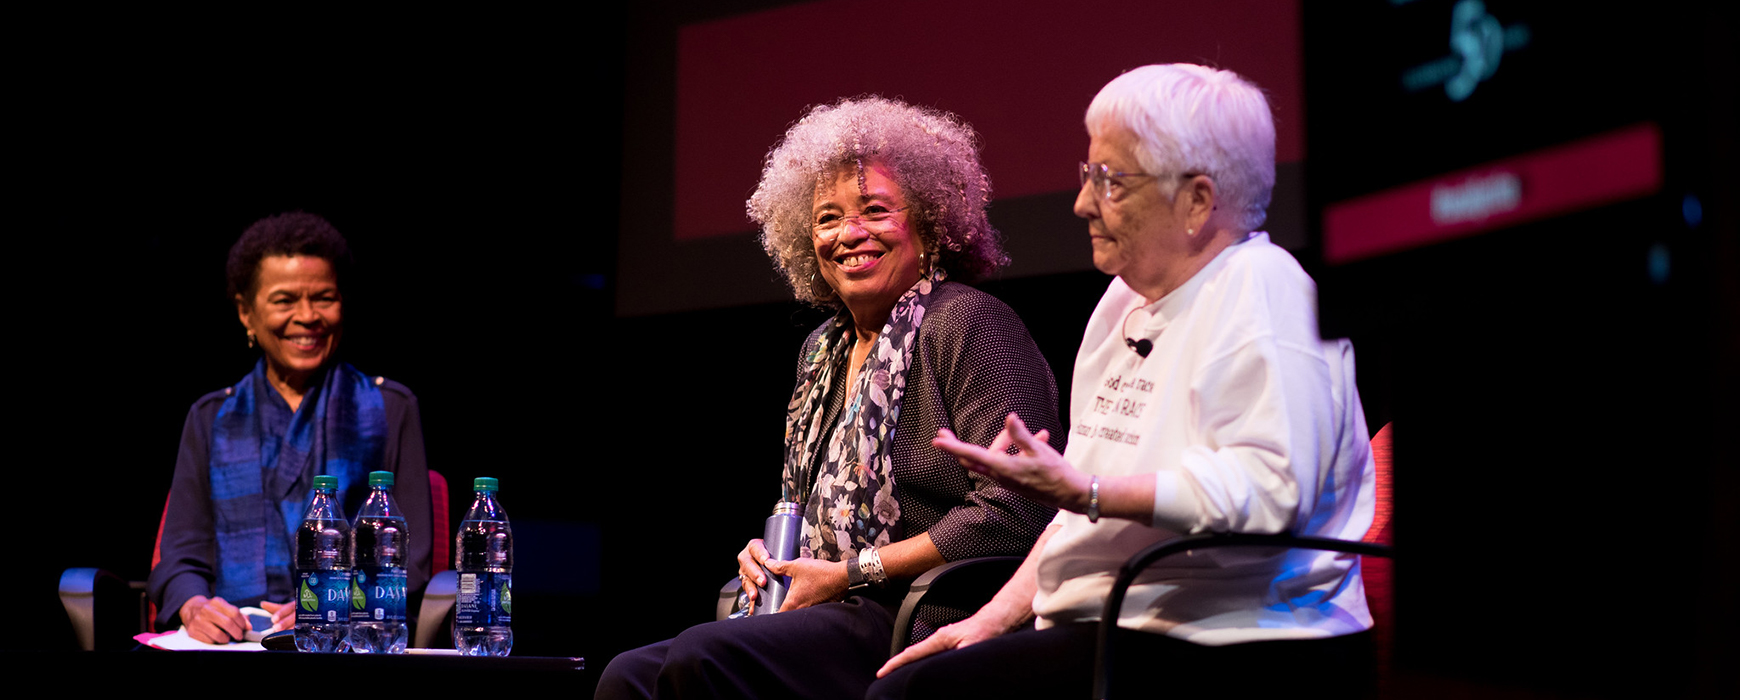 GCSW Social Justice event Conversation on Race and Privilege with Angela Davis and Jane Elliott